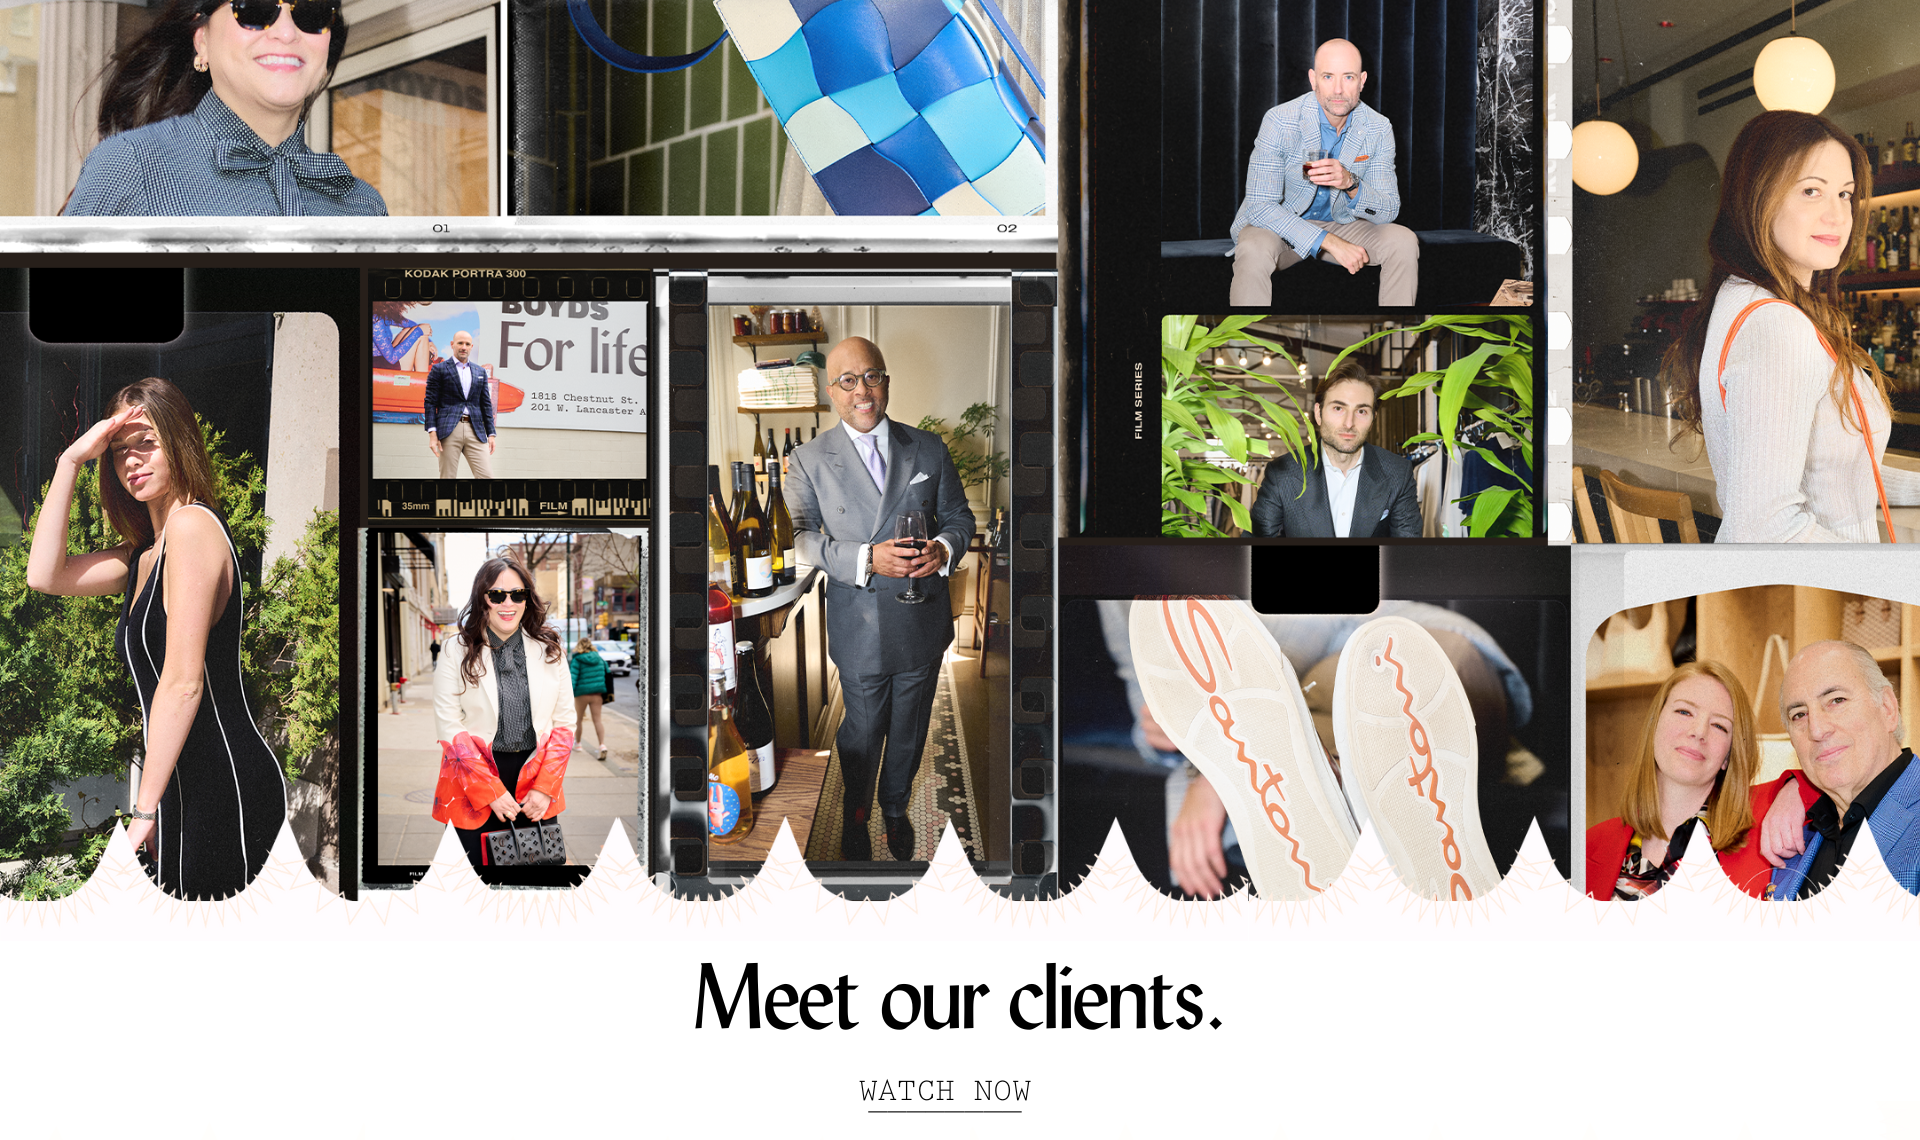 Load video: Meet our Clients.